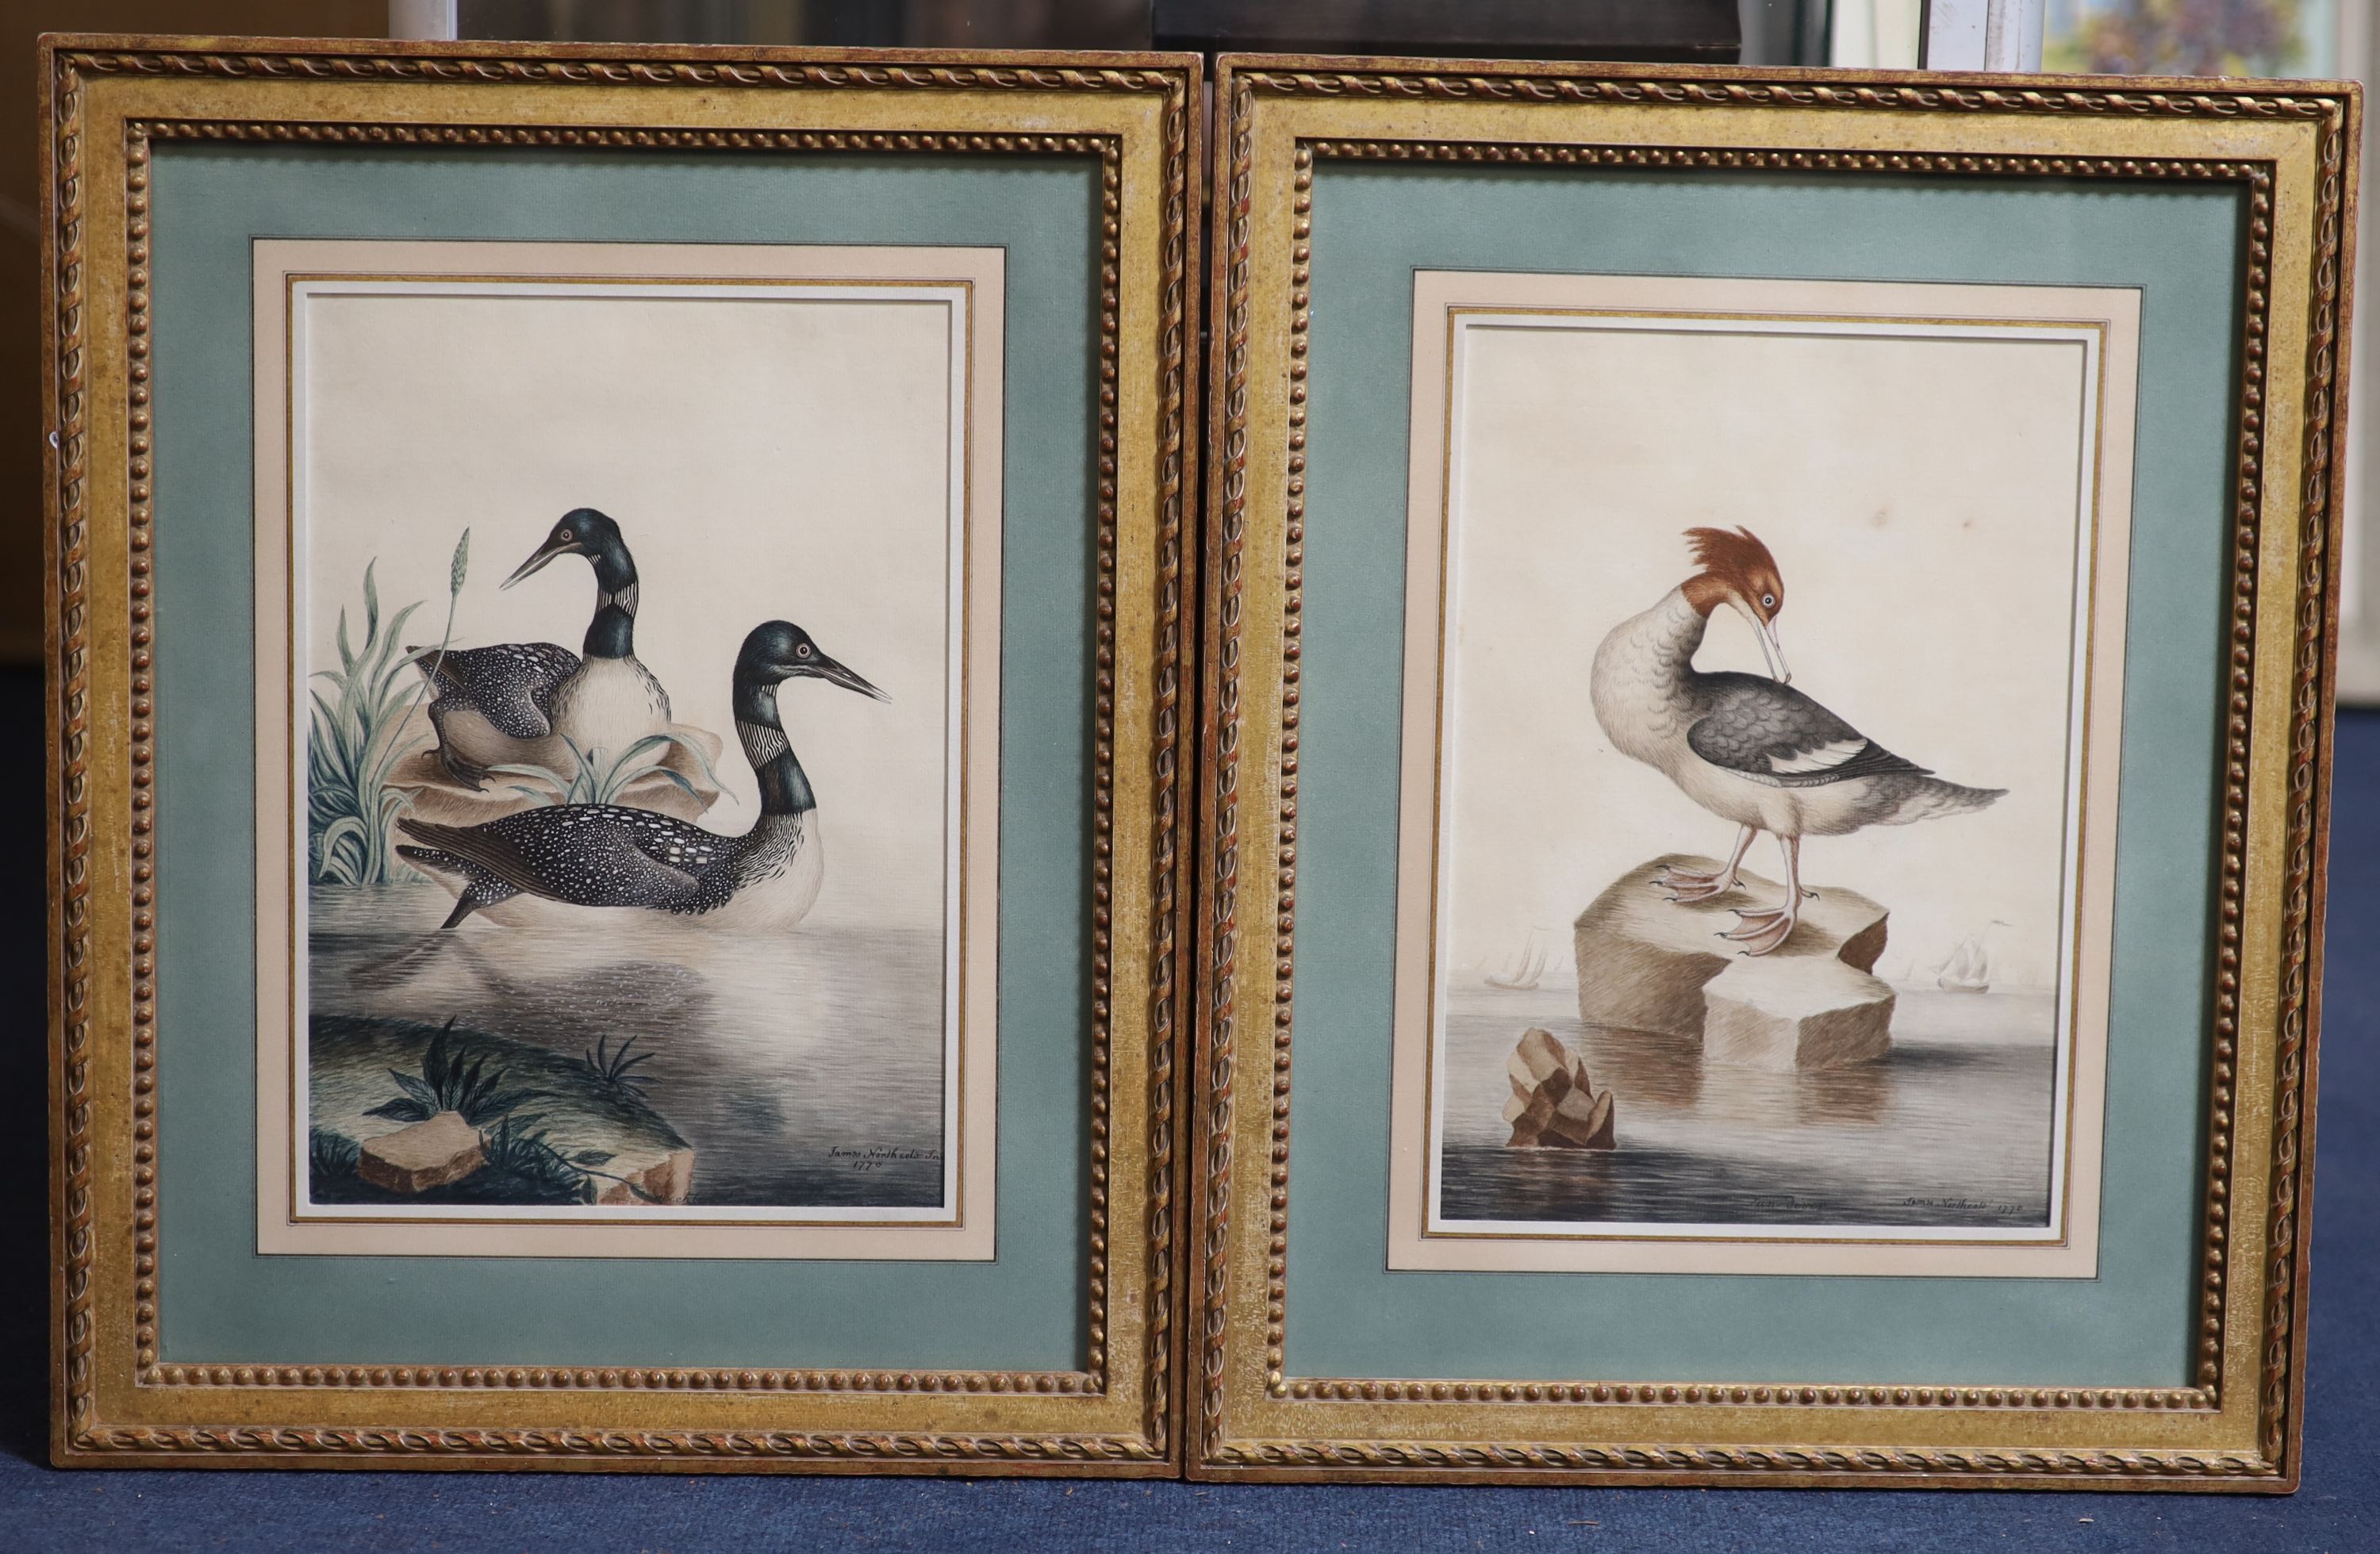 James Northcote (1746-1841), 'A pair of Great Northern Divers' and 'A Merganser perched on a rock', pair of watercolours